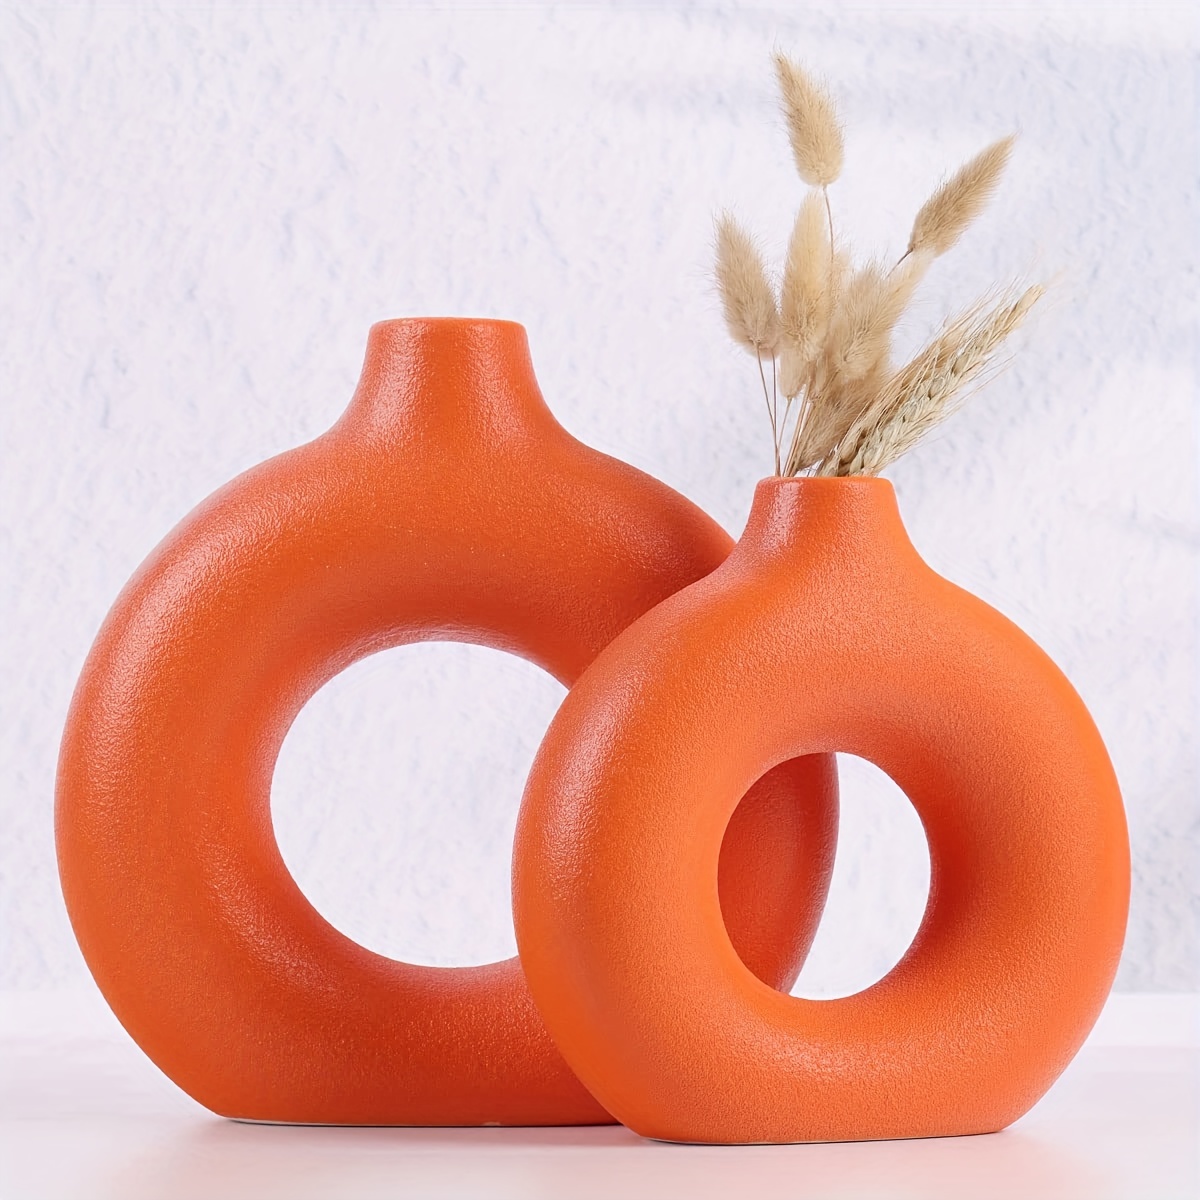 2pcs orange ceramic vase round pampas grass flower vases for modern home decor boho nordic minimalist style for living room kitchen dining table office decorative centerpieces gift no plants included